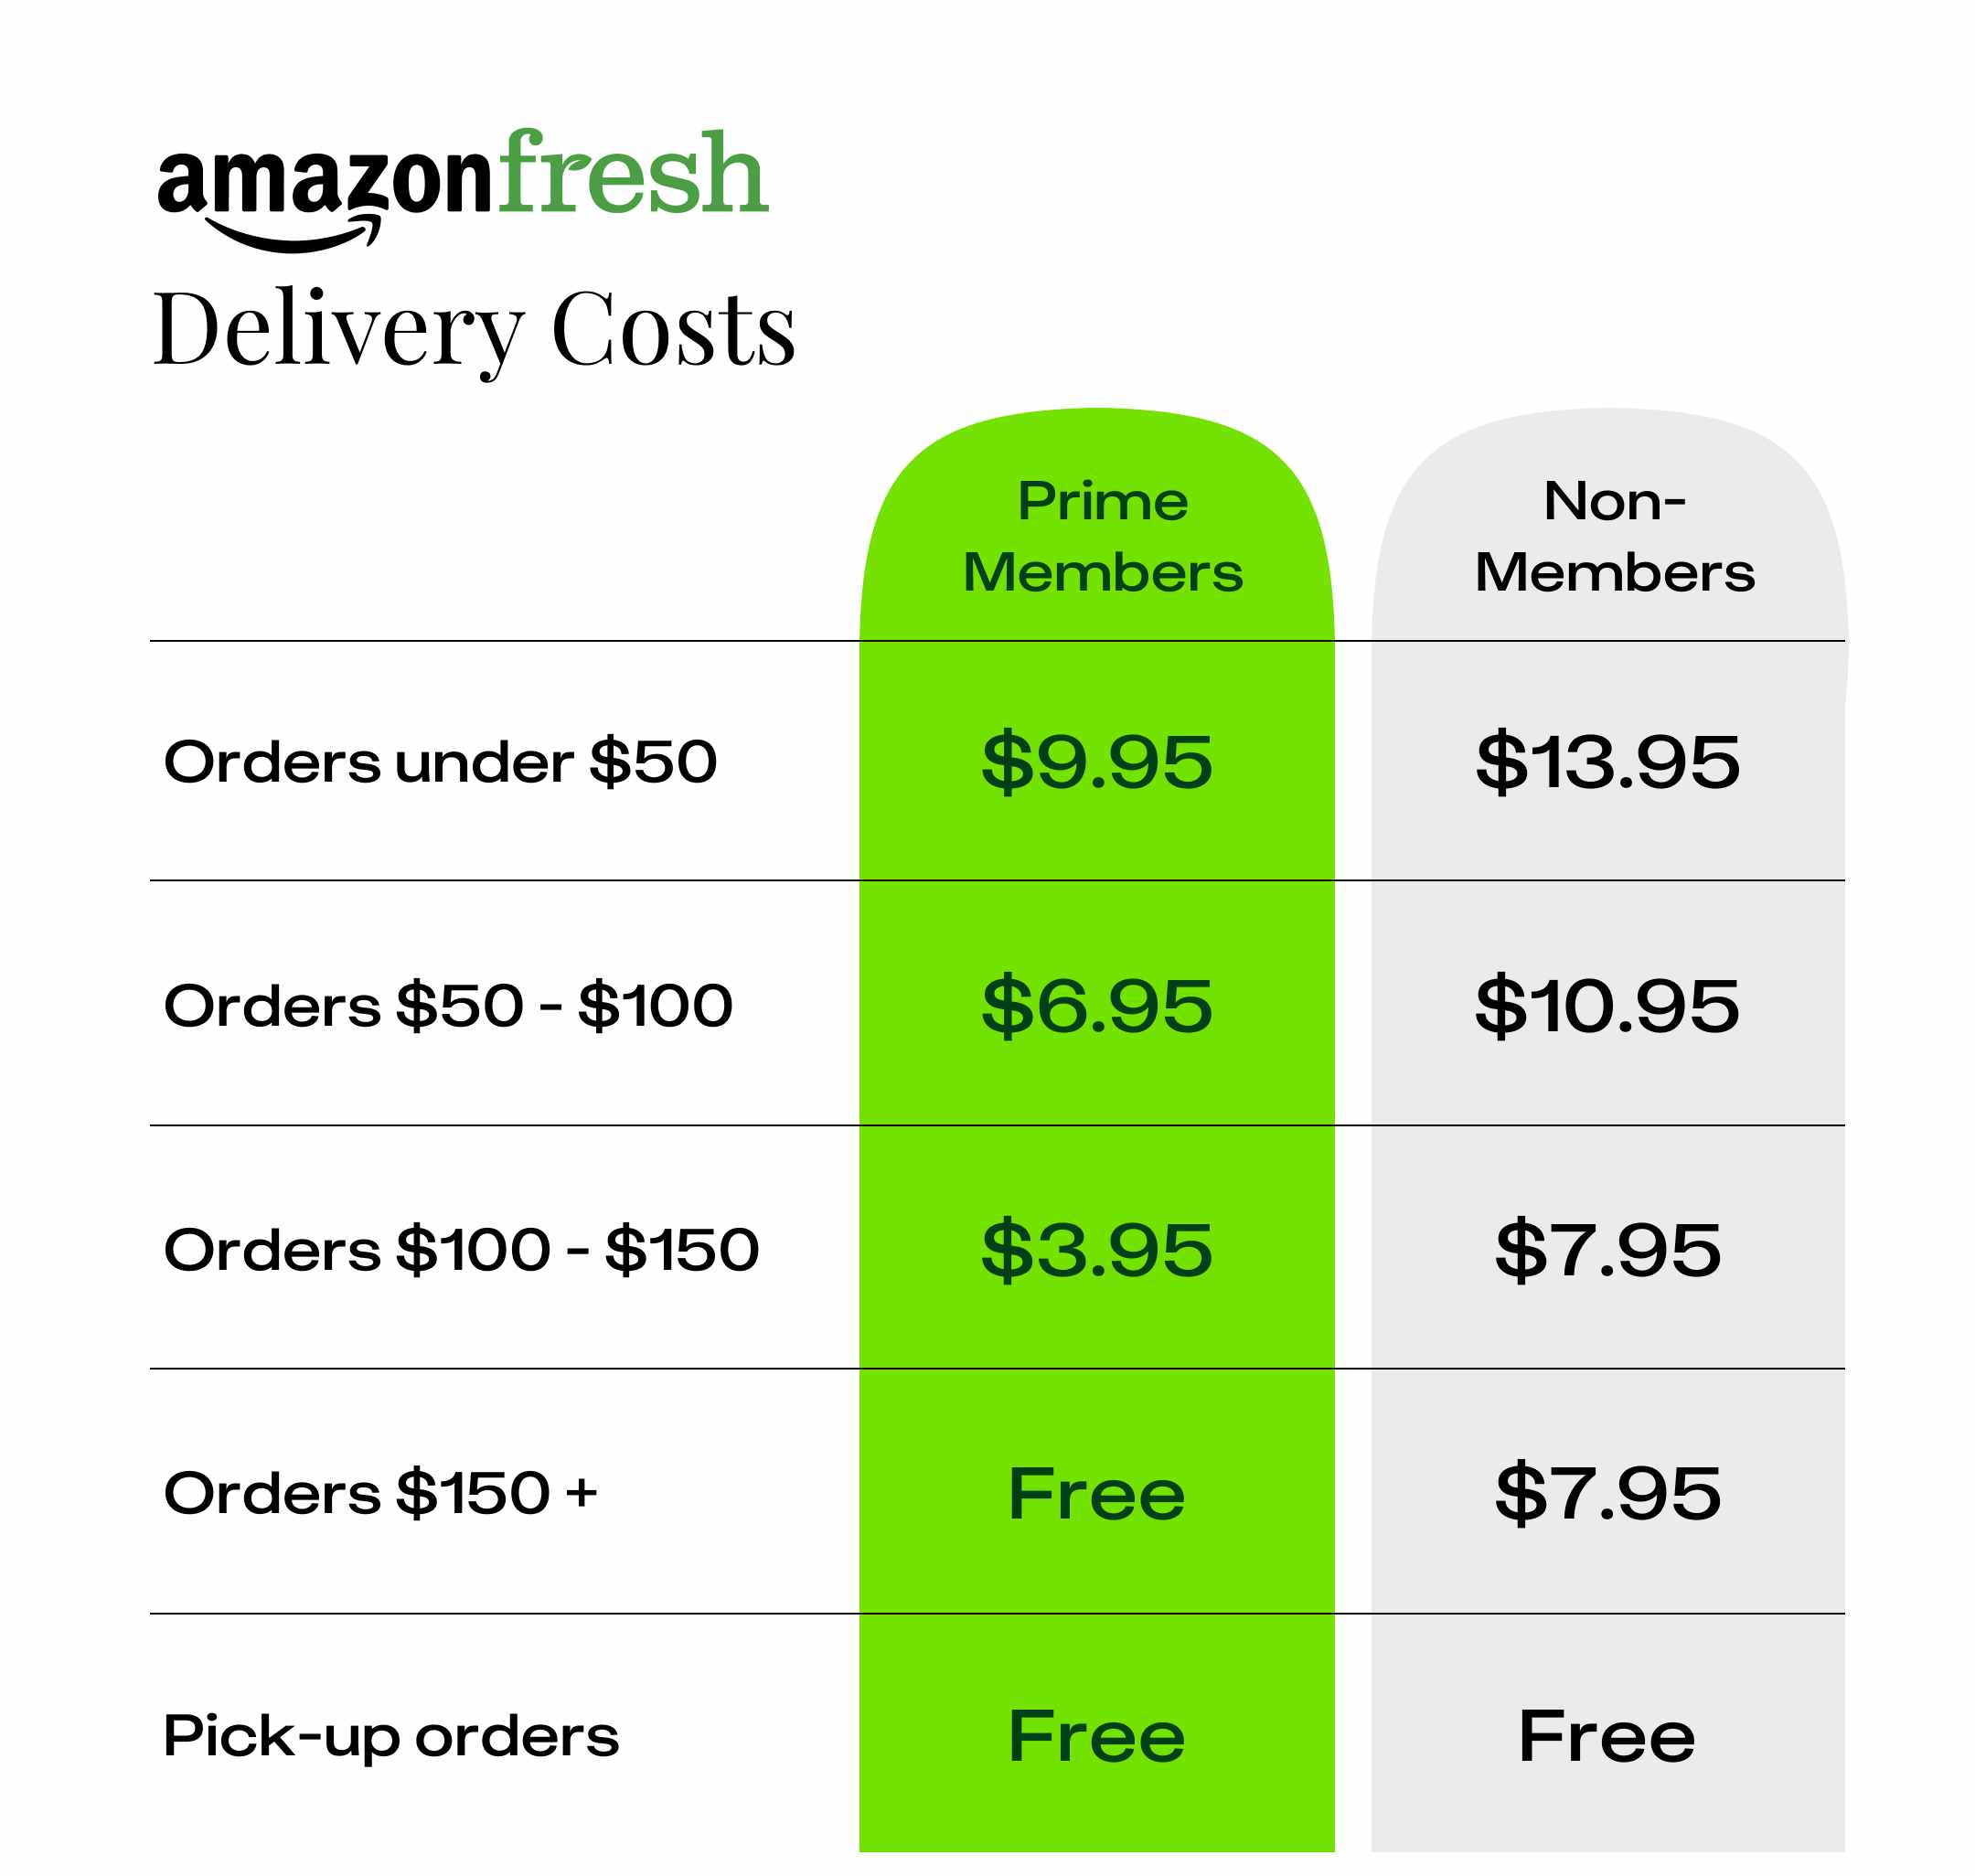 amazon fresh delivery costs graphic